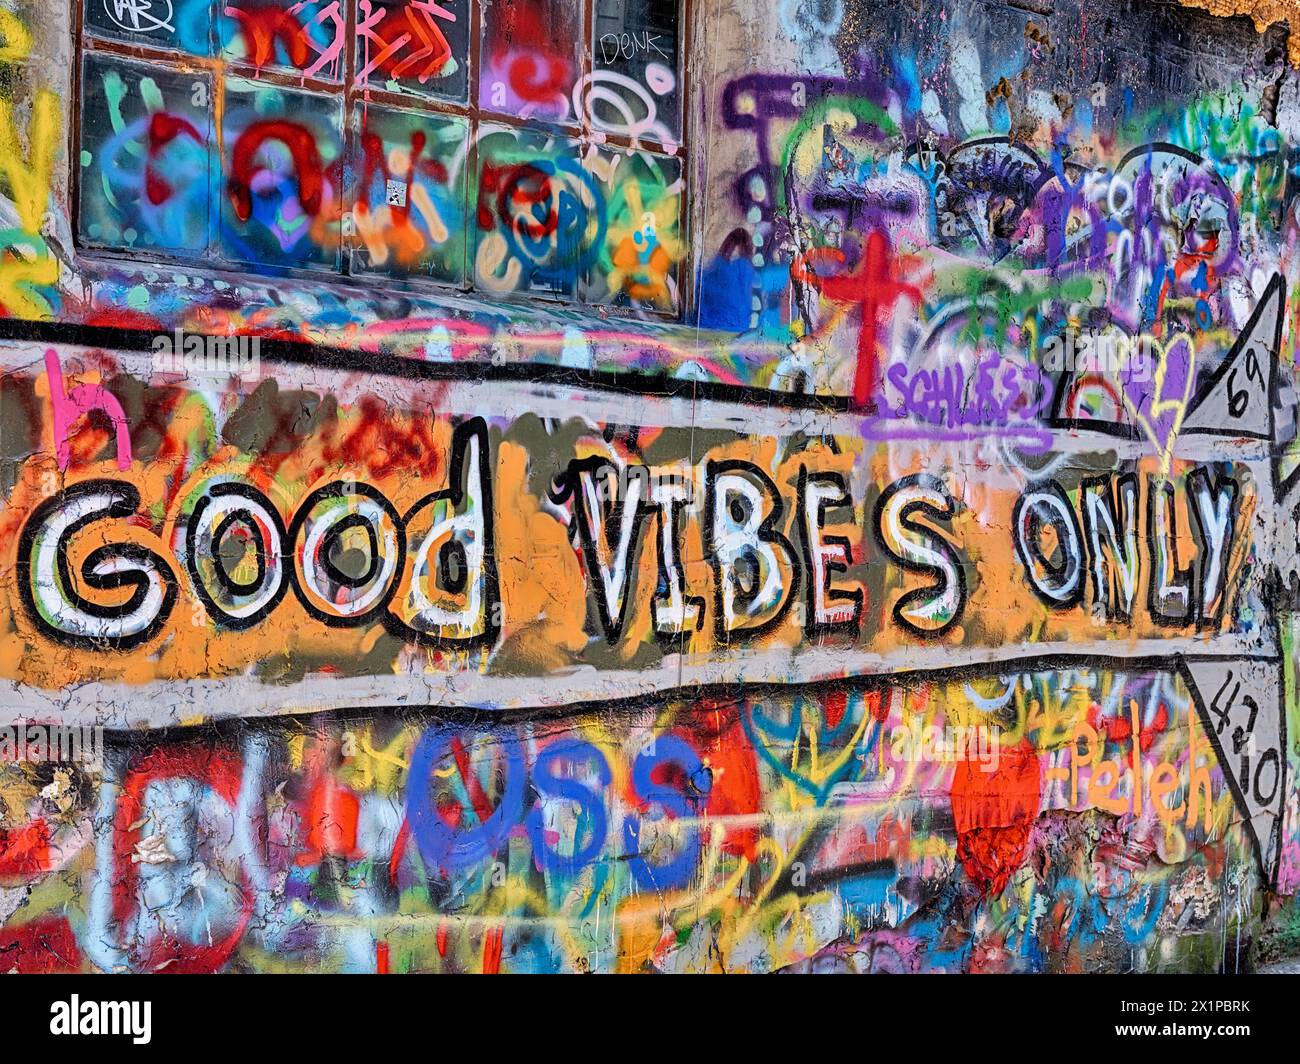 TEL AVIV, ISRAEL - JUNE 11, 2023: A richly decorated wall in the Florentin neighborhood of Tel Aviv, Israel has a message of Good Vibes Only. Stock Photo